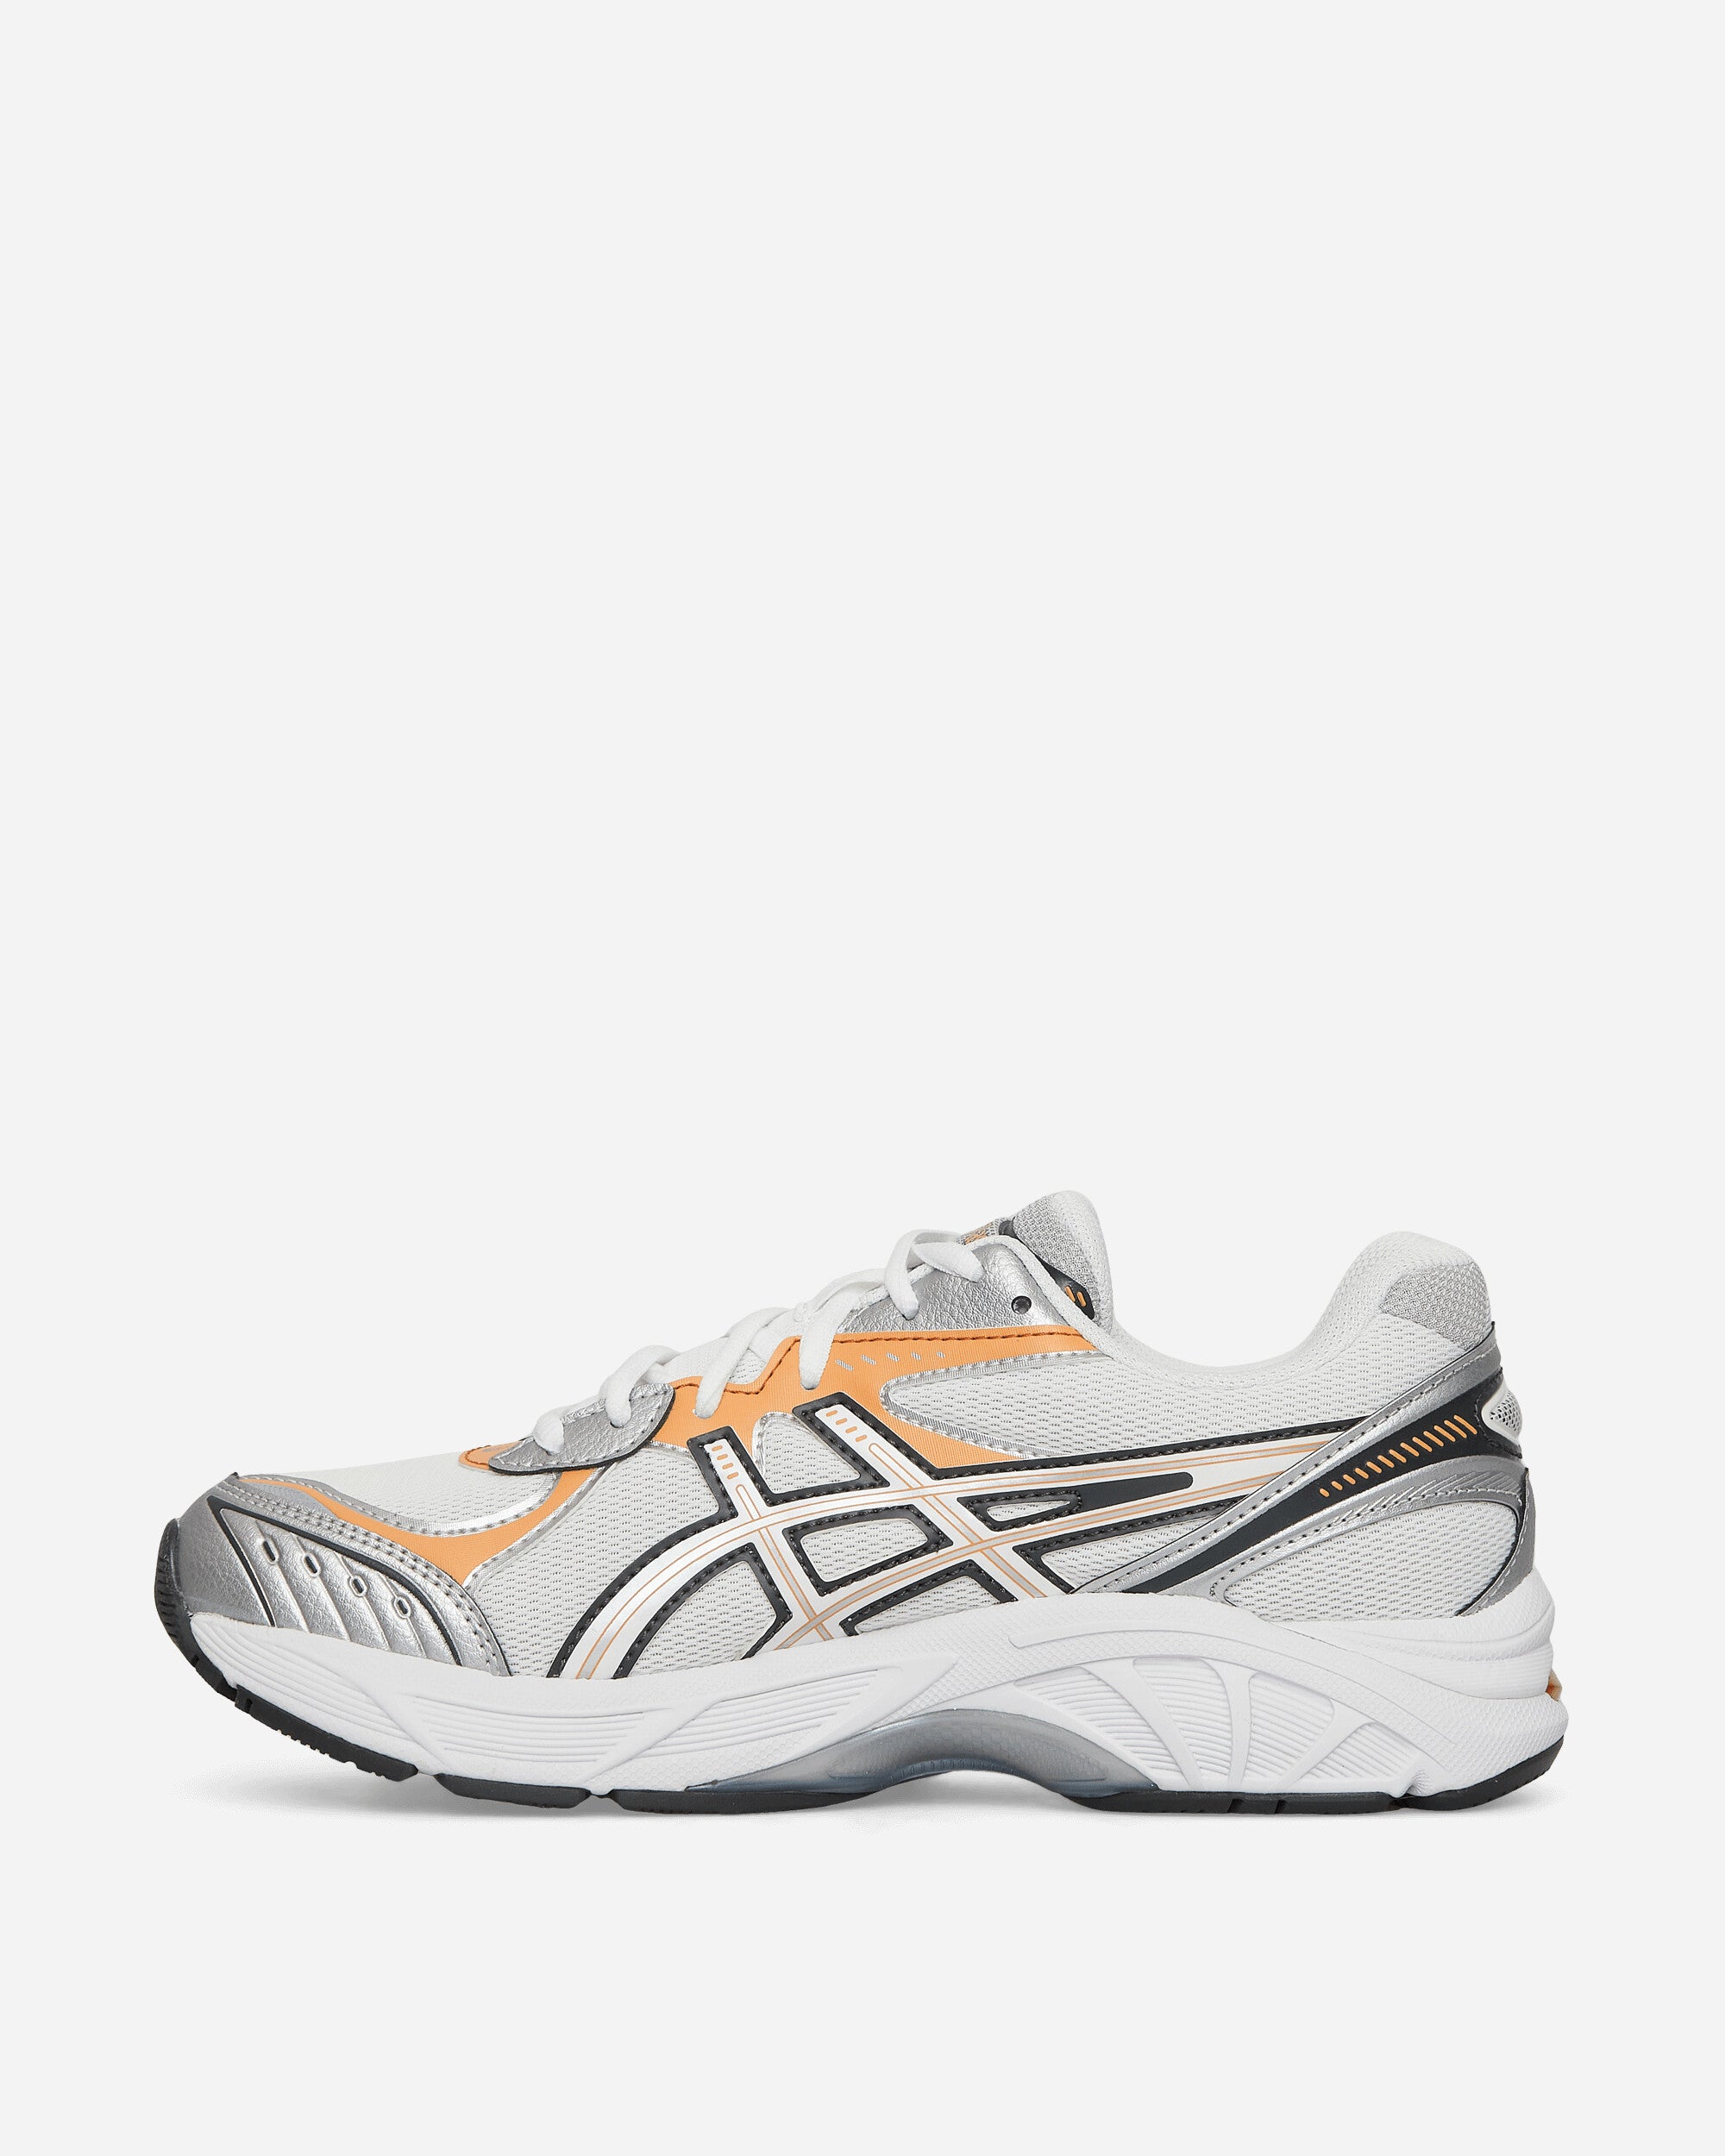 Asics Gt-2160 White/Orange Lily Sneakers Low 1203A320-101